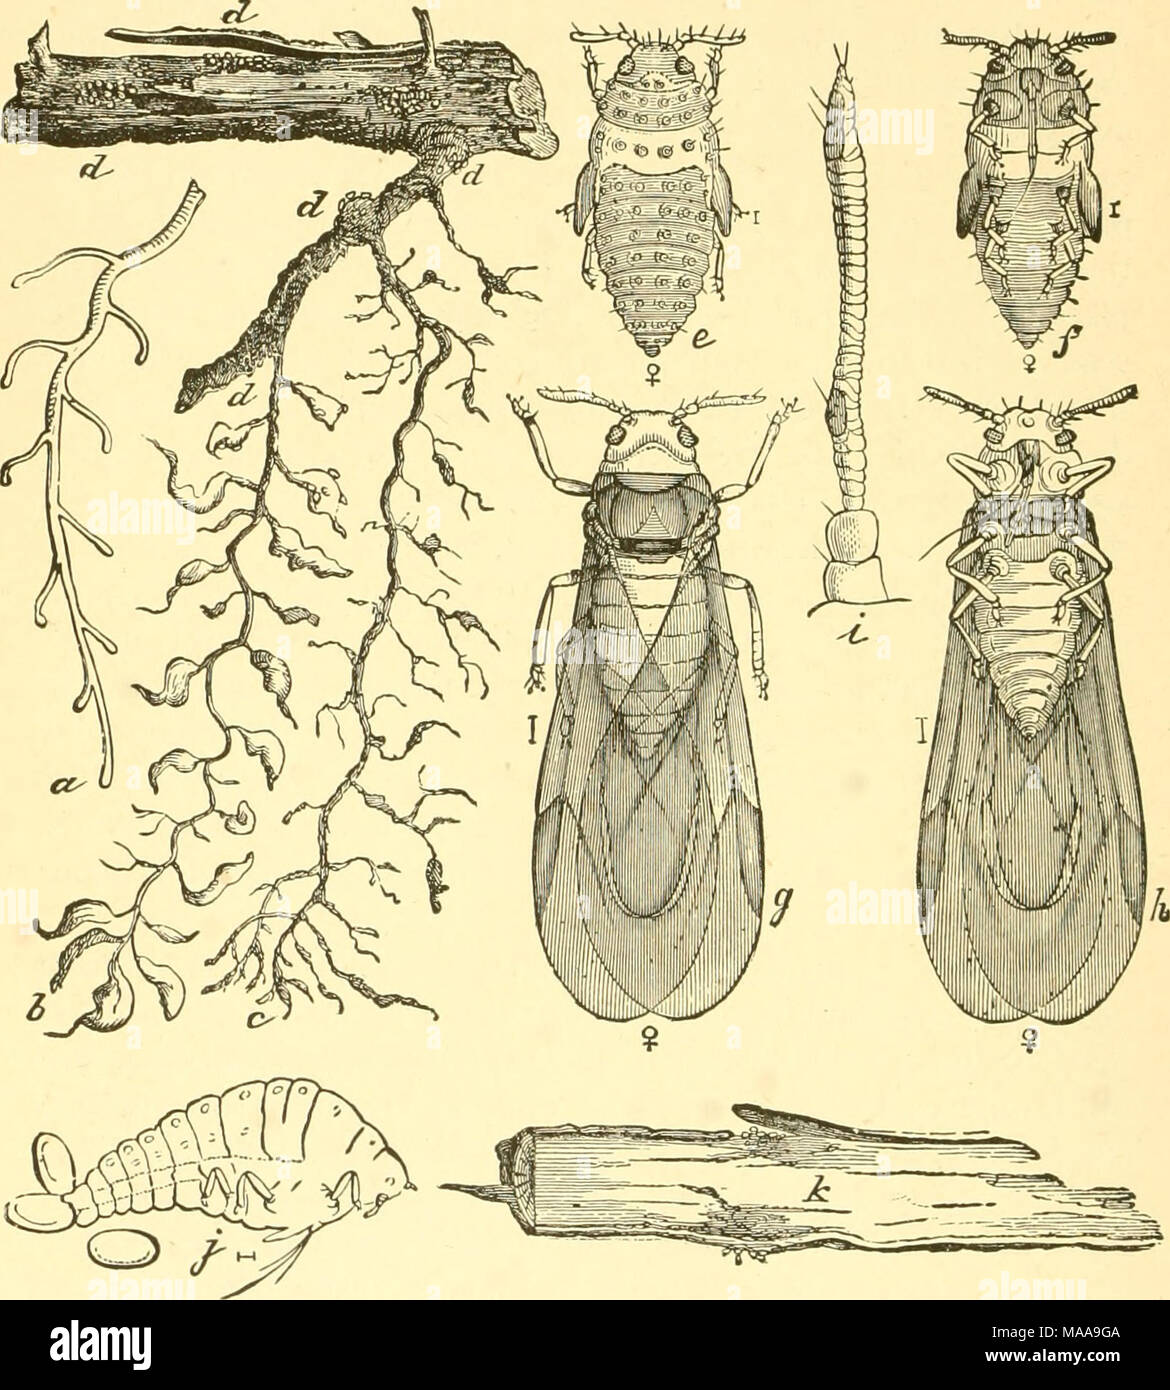 . Economic entomology for the farmer and fruit-grower . Phylloxera vastatrix.—a. unaffected rootlet of grape; b, rootlets with newly-formed galls; c, same, with old and dried-up tissue; dd, groups of the lice on roots and root- lets ; e,/, female pupa, from above and below ; g, h, winged females; i, an antenna; J, oviparous wingless female and her eggs; k, root showing location of the eggs. An advance upon those root-living species is found in Phyl- (oxera, which belongs with Chermes in a sub-family, Chermesina, Stock Photo